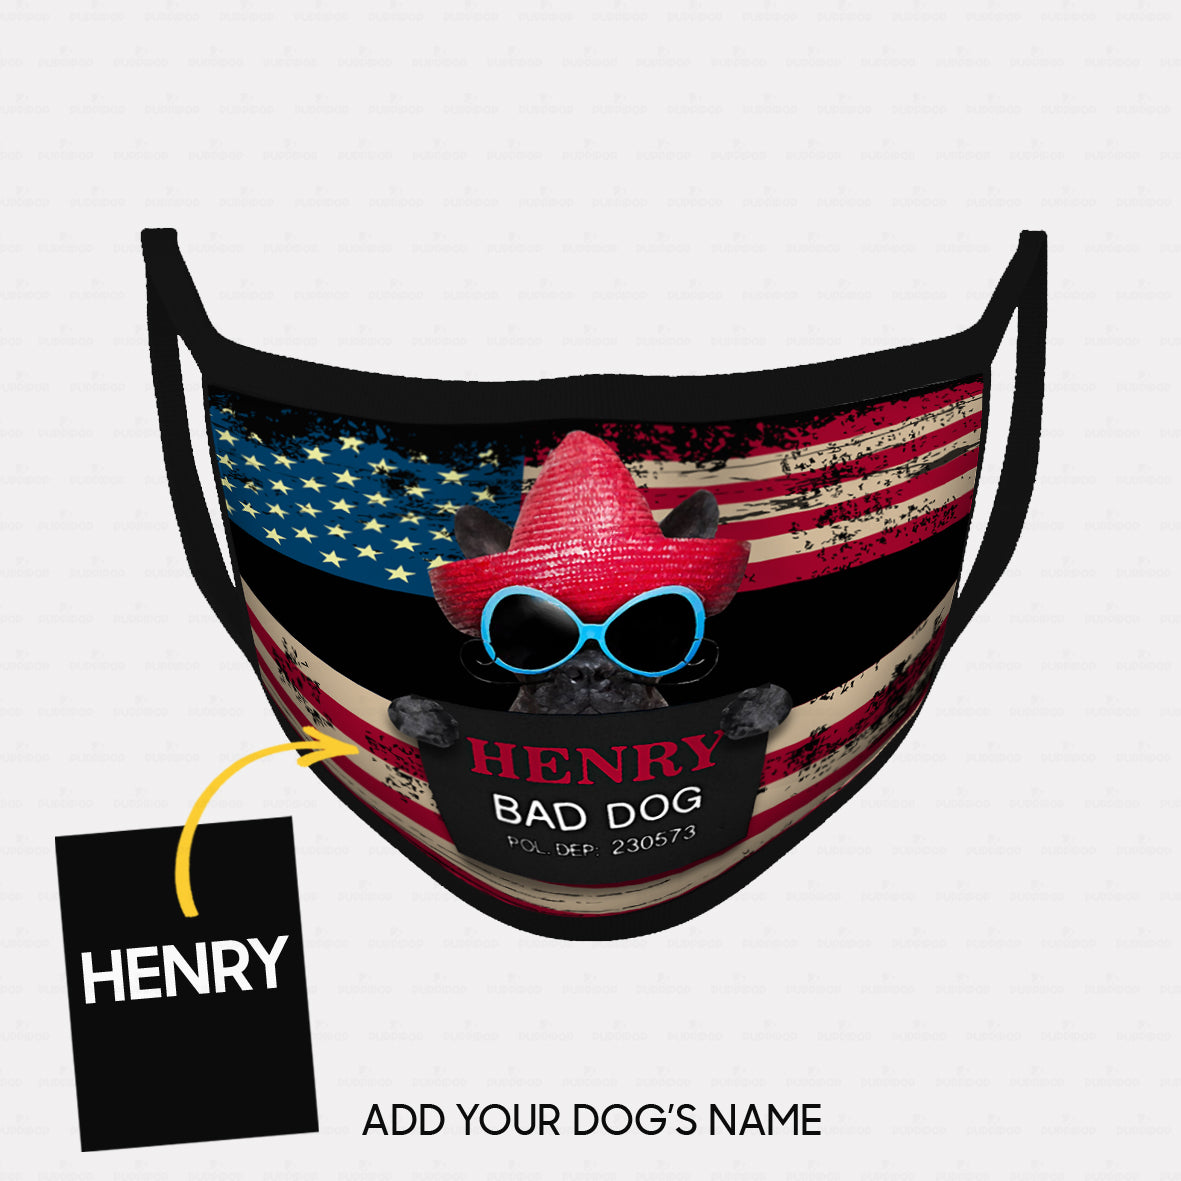 Personalized Dog Gift Idea - Bad Dog Wearing Tall Pink Hat For Dog Lovers - Cloth Mask